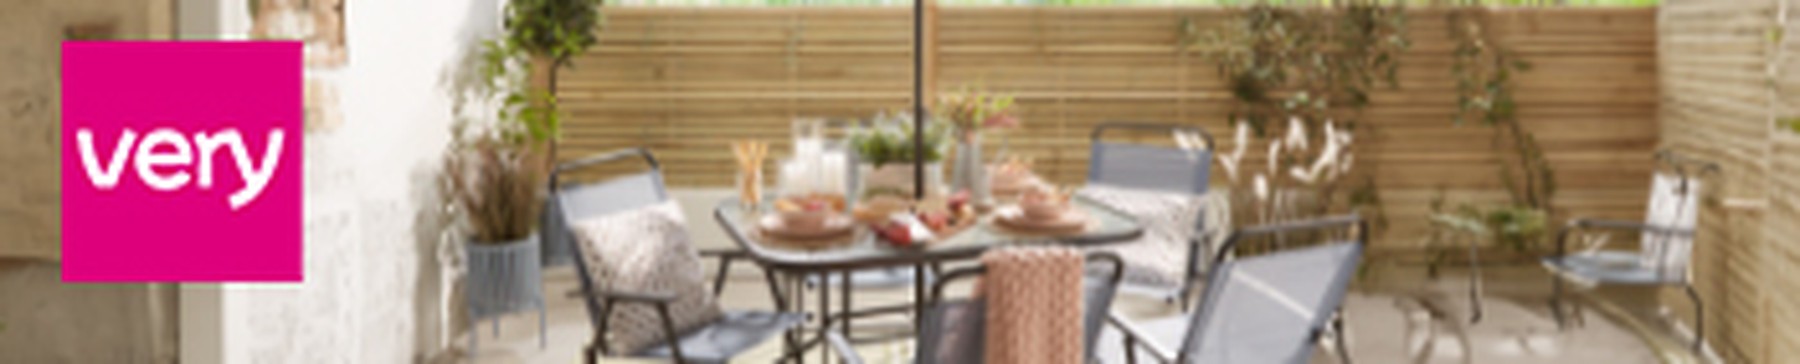 Up to 40% off selected Home & Garden